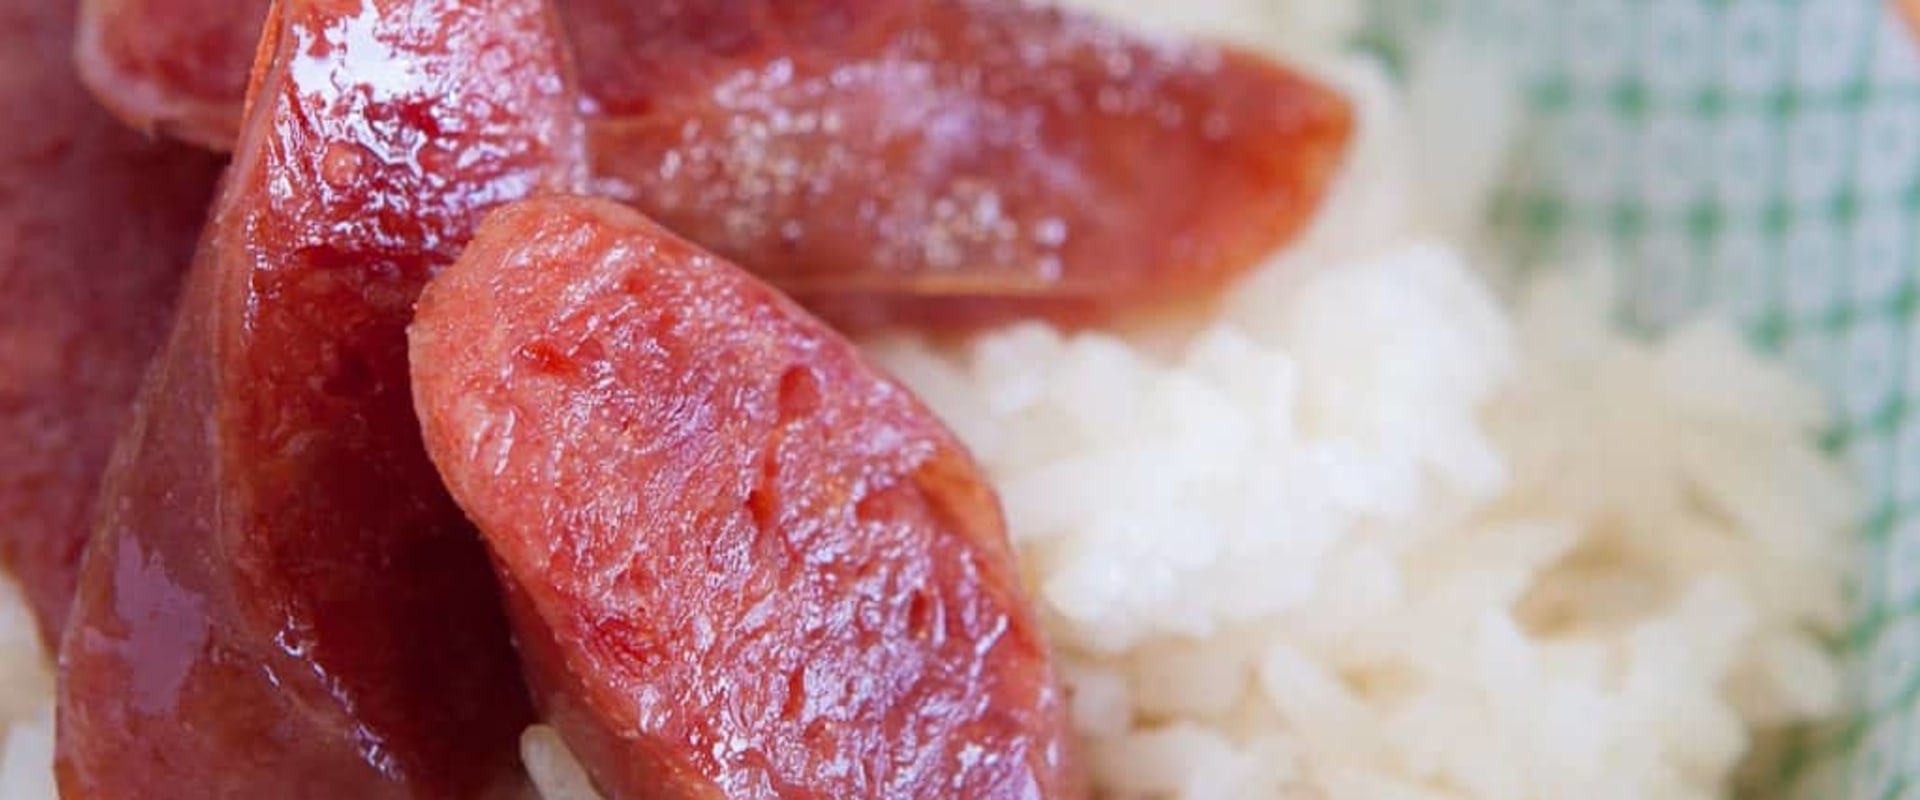 What is chinese sausage skin made of?